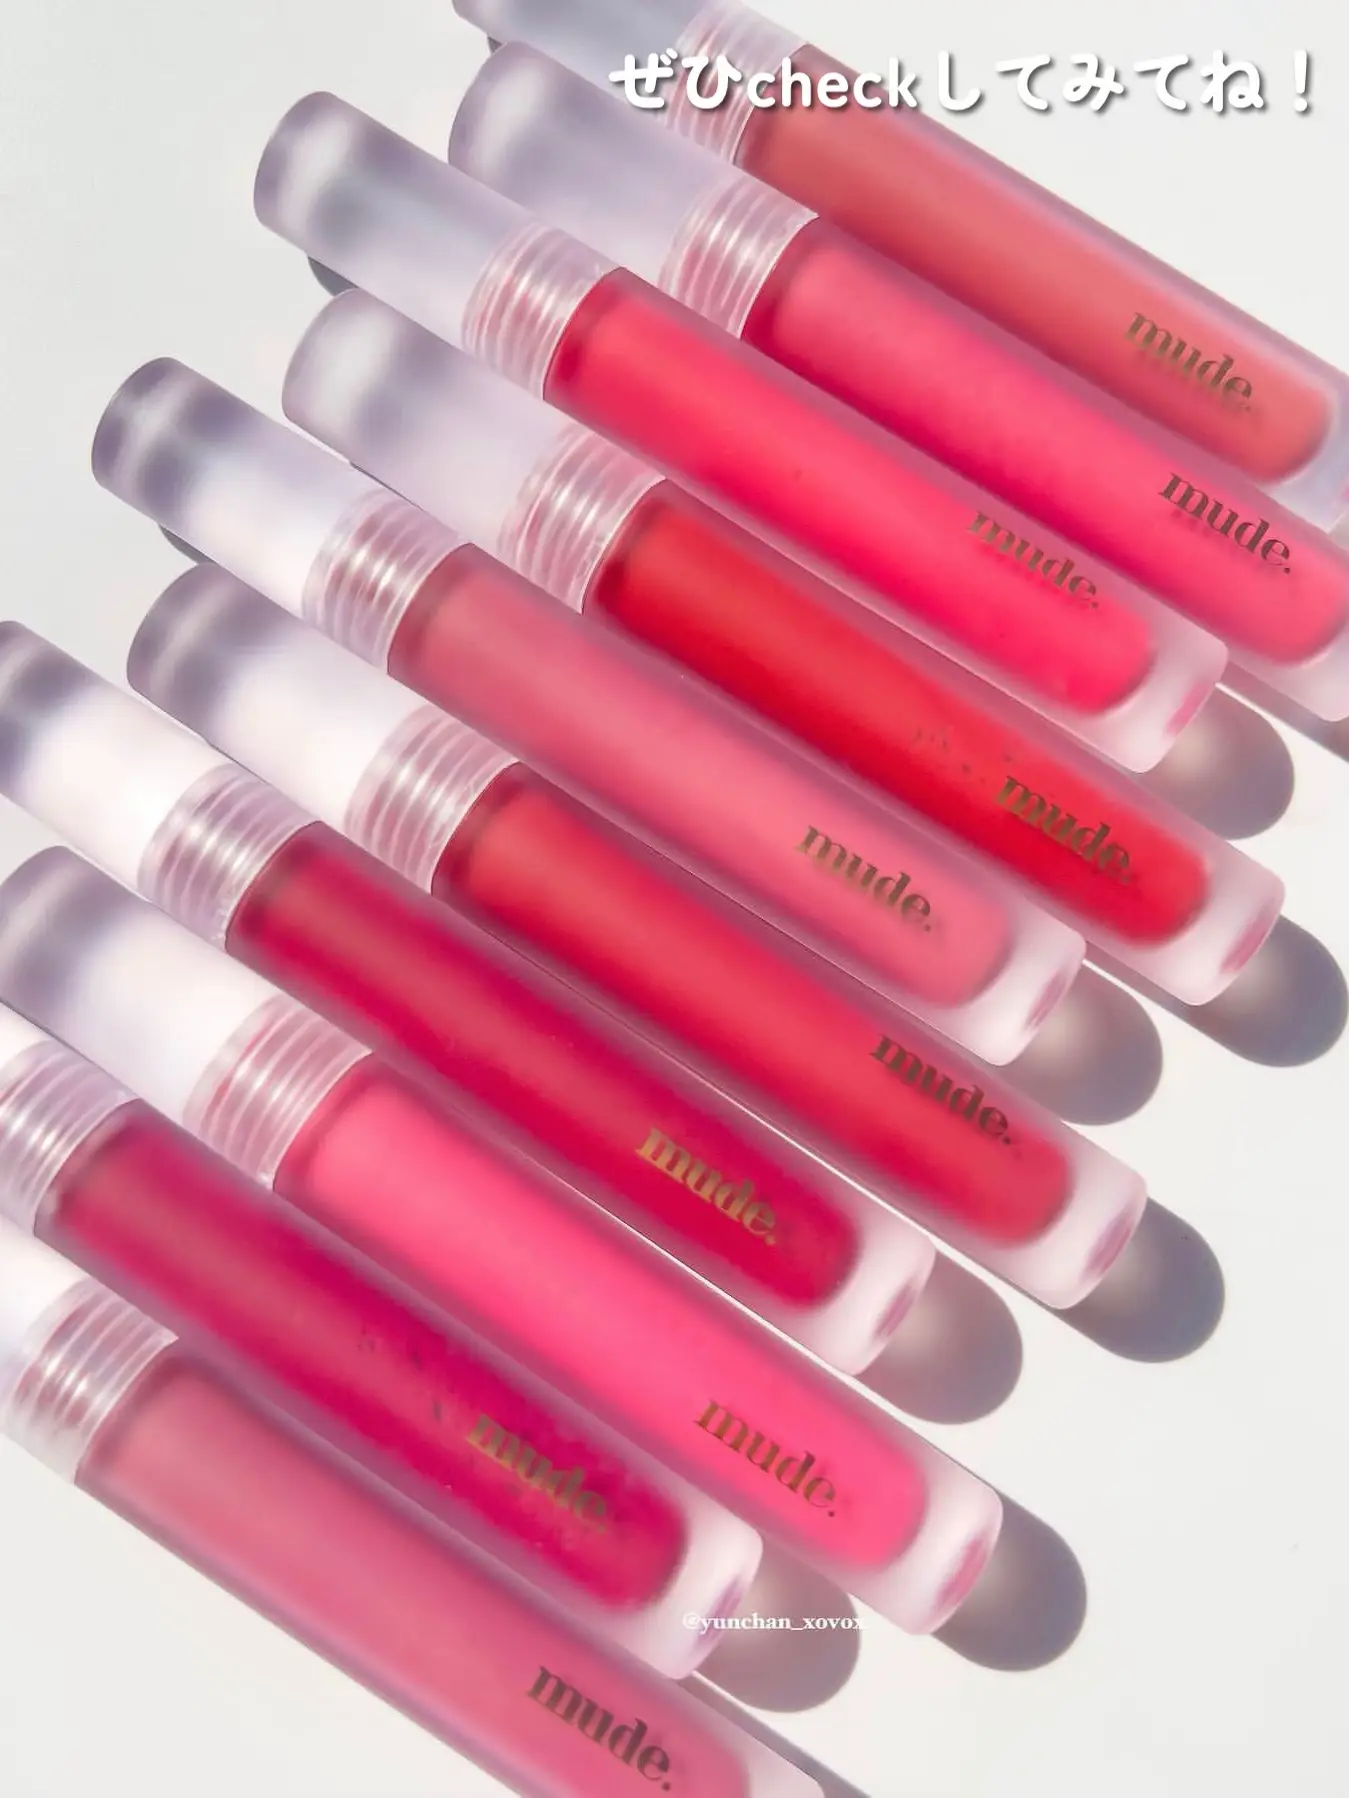 mude new work] too fashionable matte tint all colors review